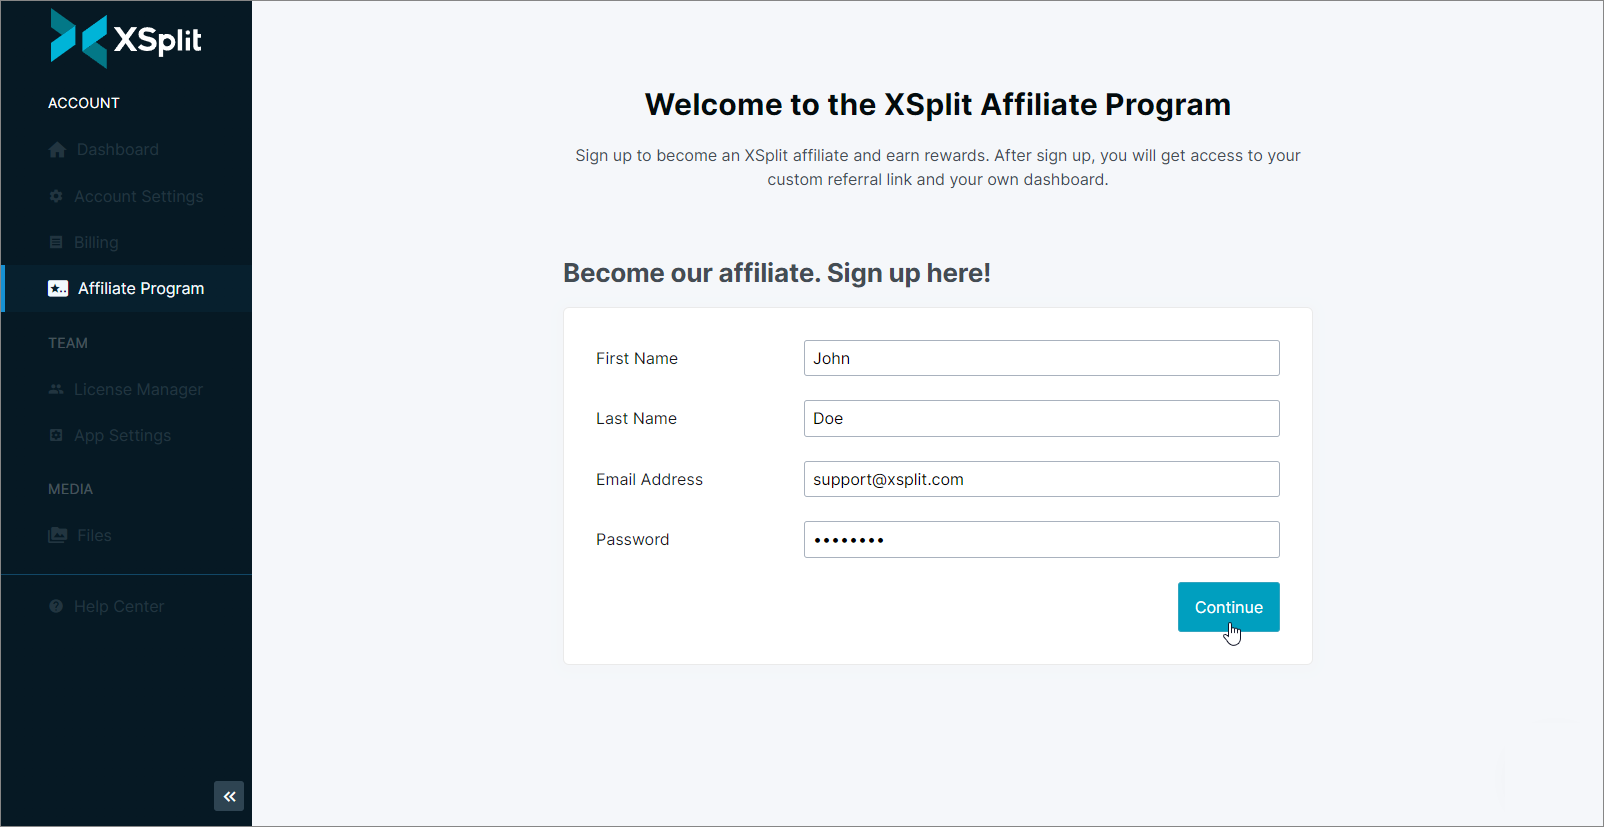 XSplit Dashboard Affiliate Program - Sign up page for those who haven't yet